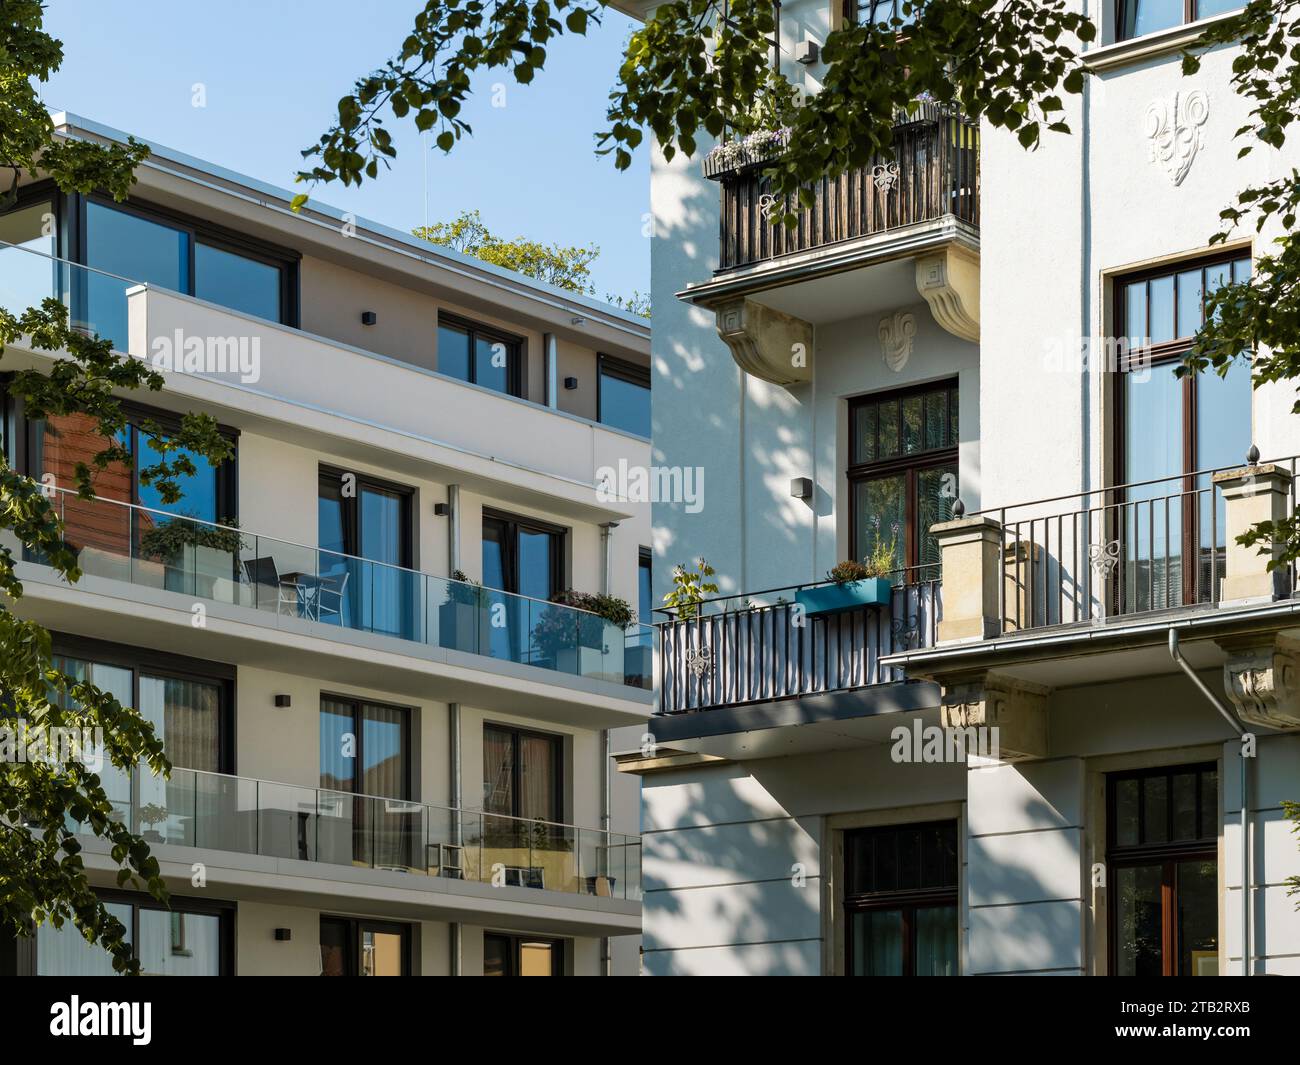 Old versus new residential architecture in Germany. Different house facades of buildings with multiple dwellings. Balconies and windows are part of it Stock Photo